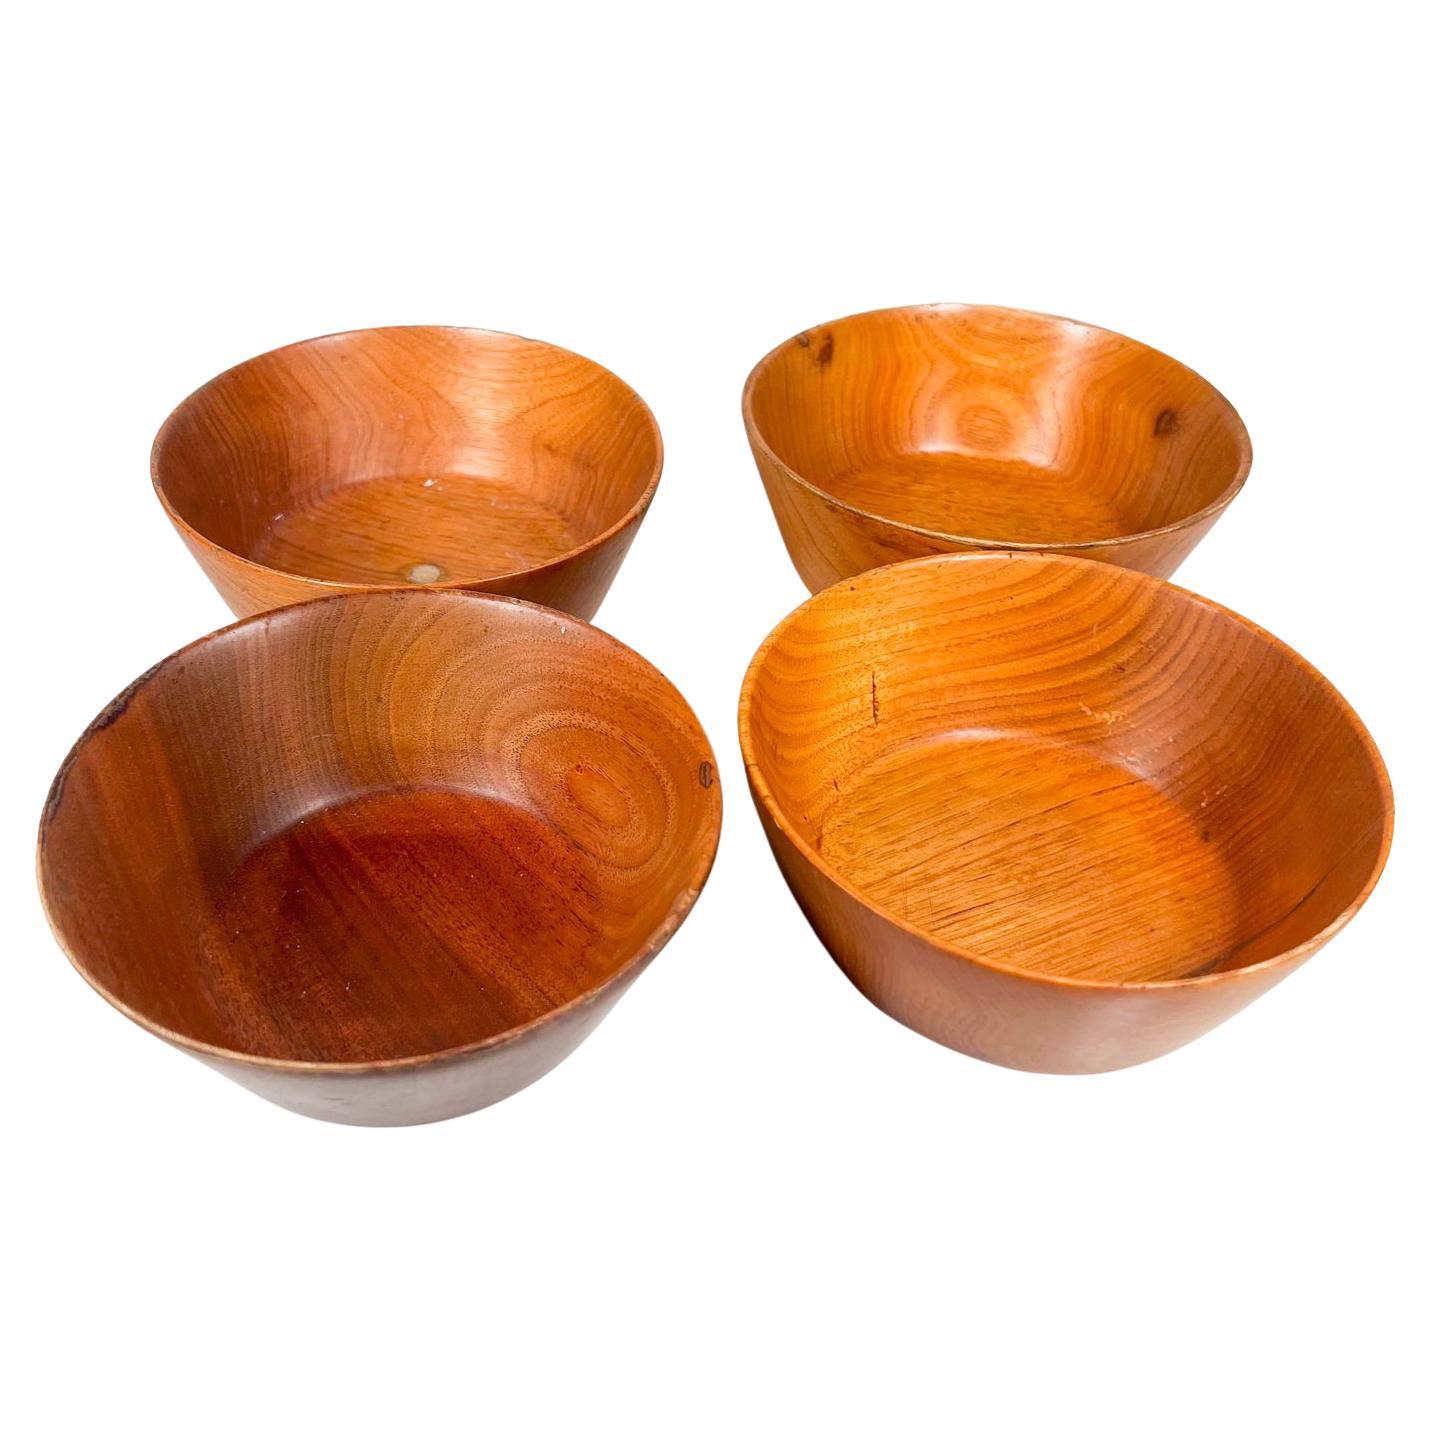 1960s American Studio Craft Hand-Carved Wood Bowl Set by Harry Nohr For Sale